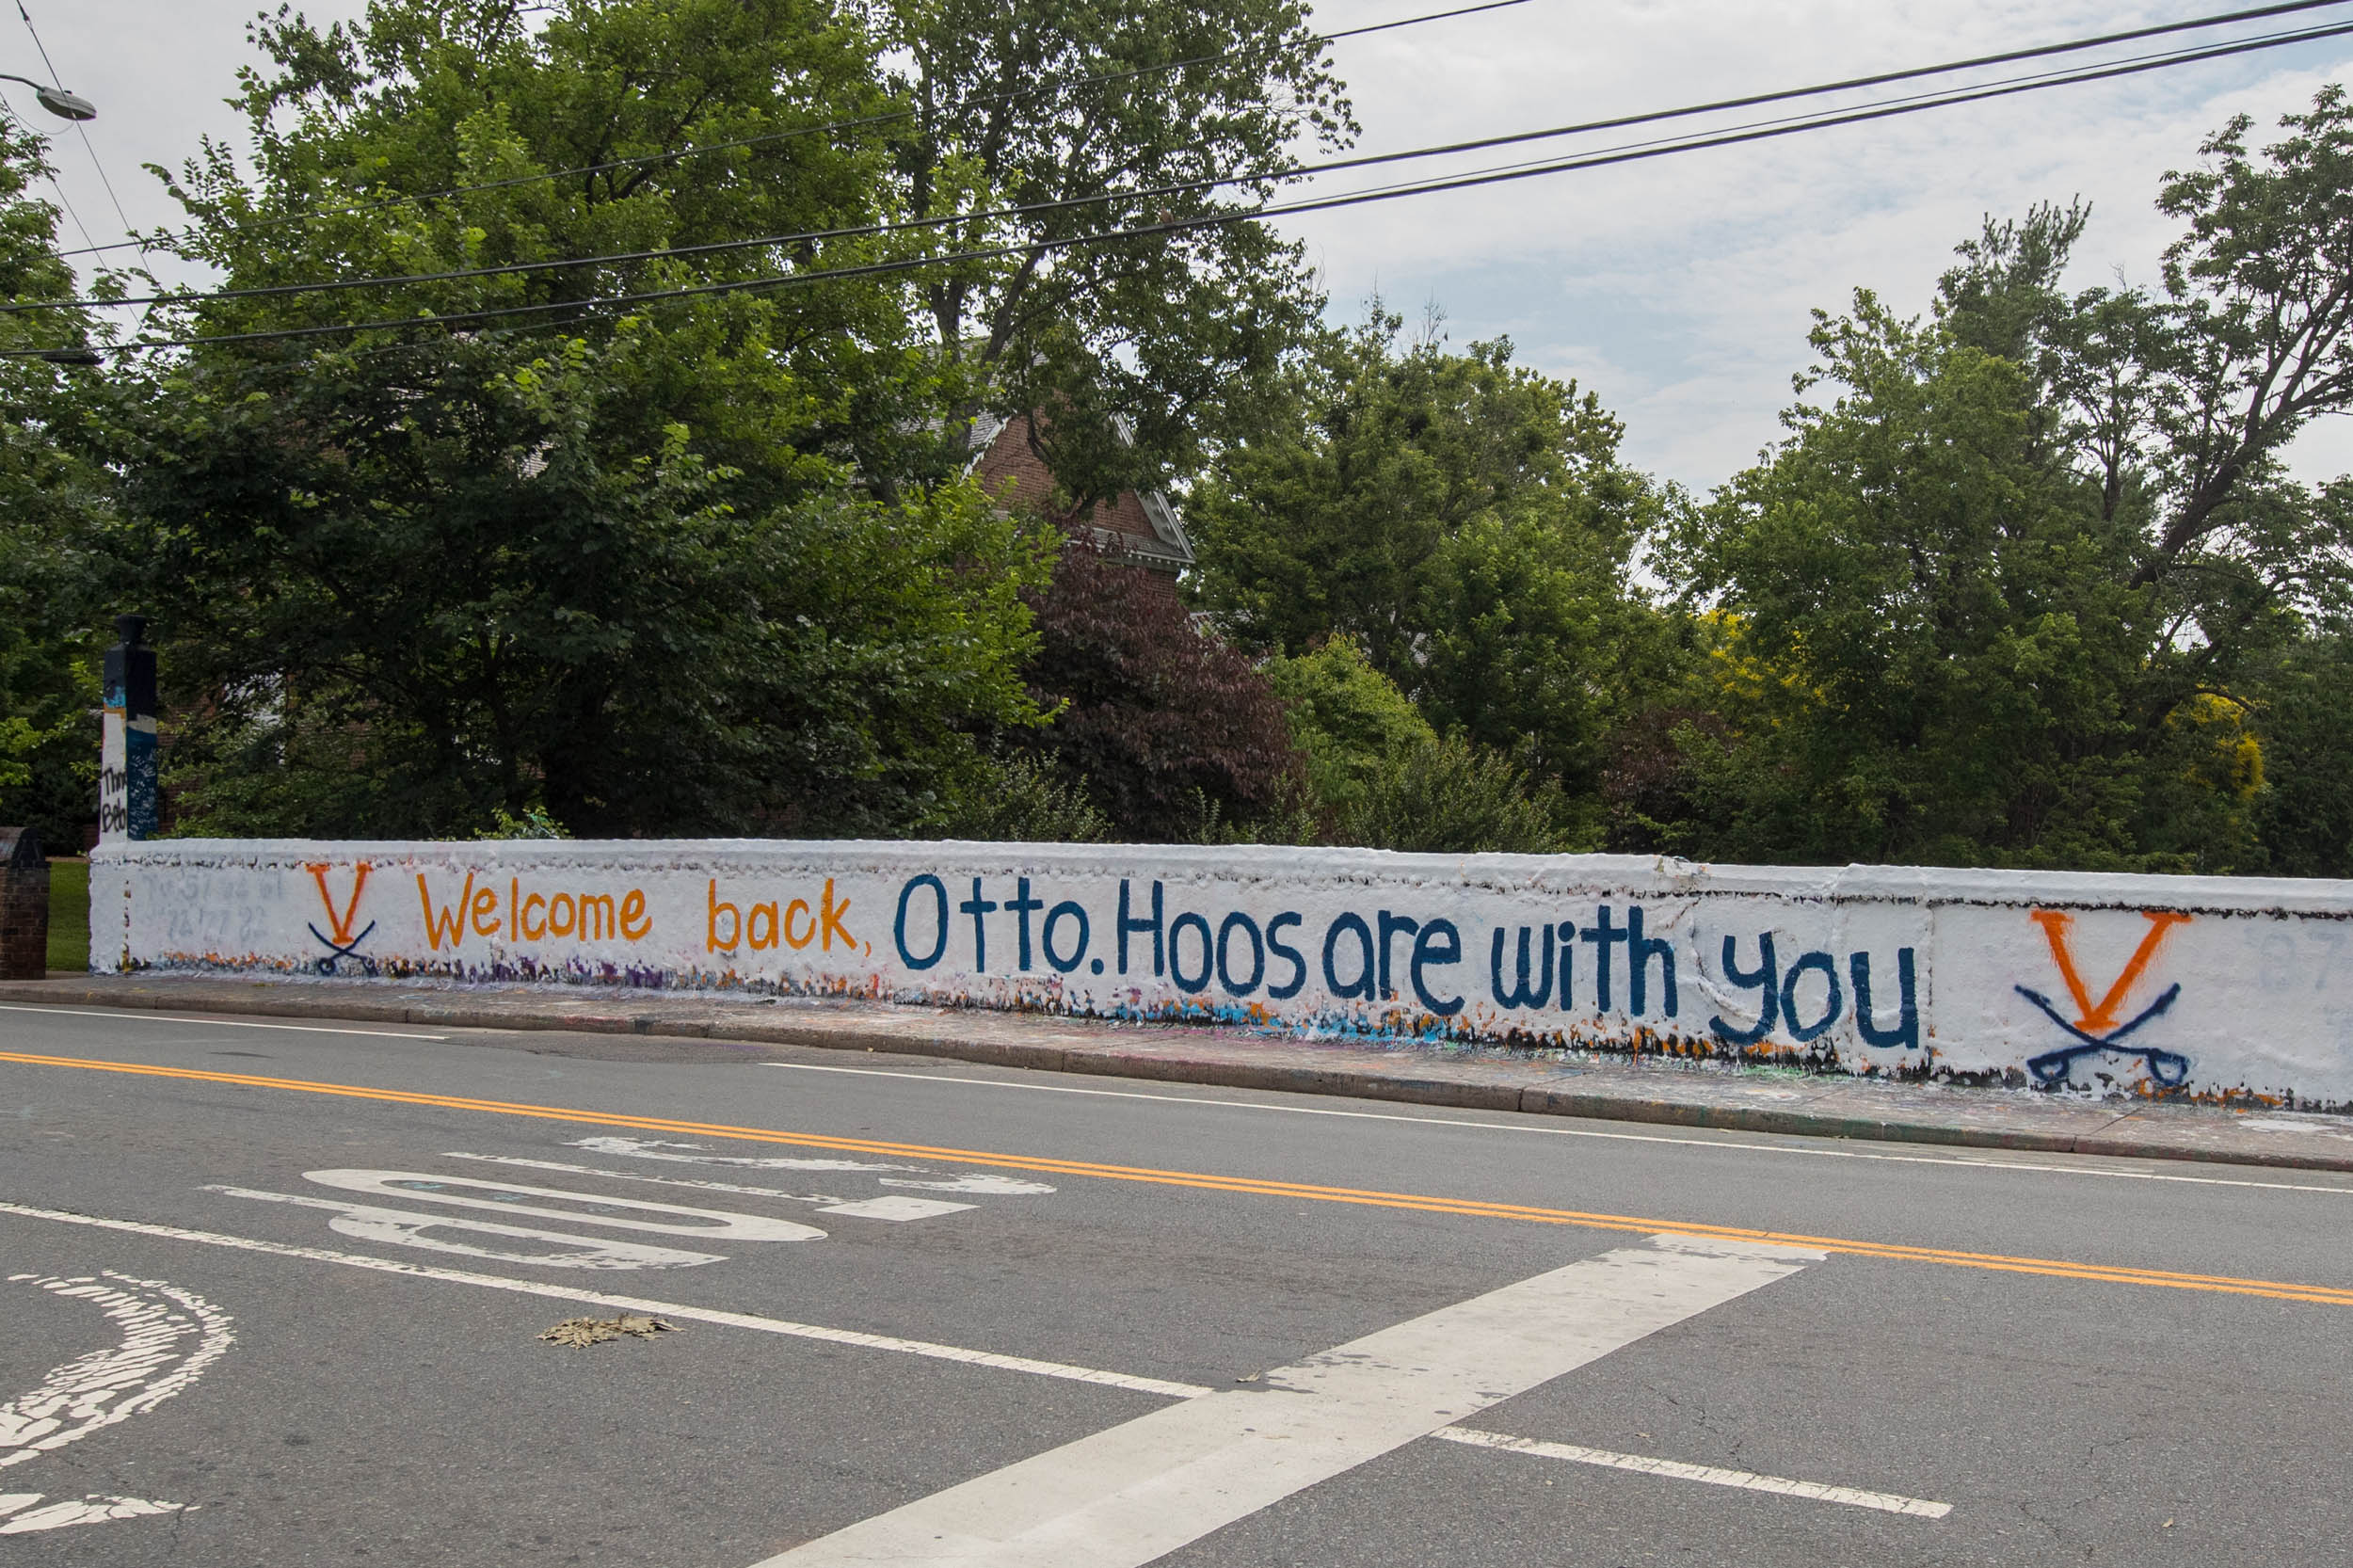 Beta Bridge message says Welcome back Otto.  hoos are with you.